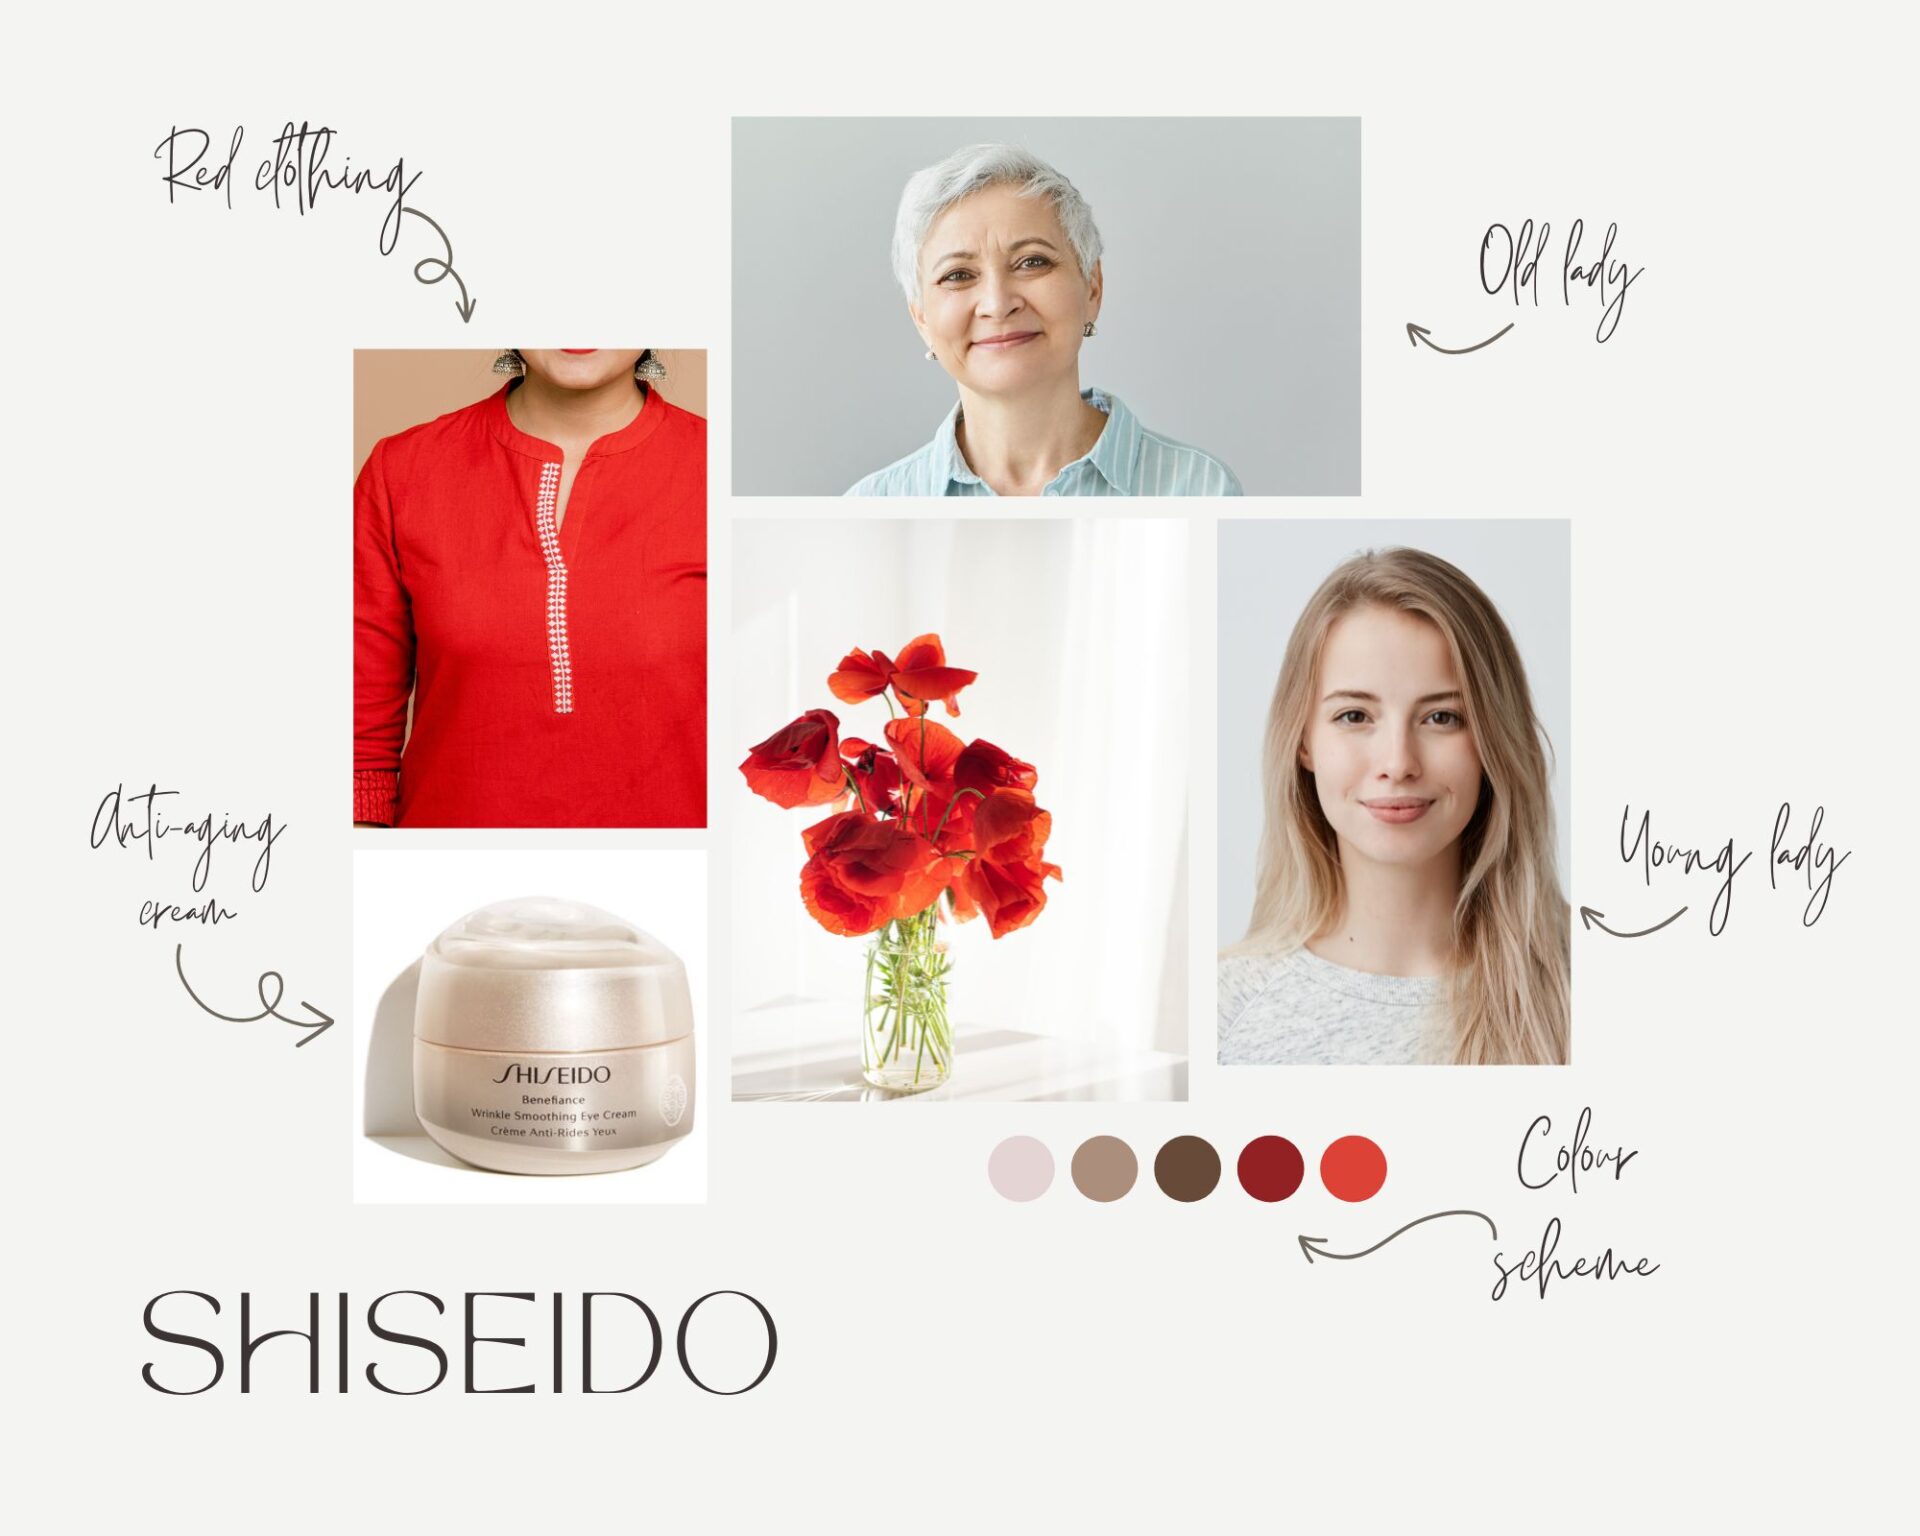 Collage format of different images of female models, red colours of clothign and flowers and the anti-aging cream.